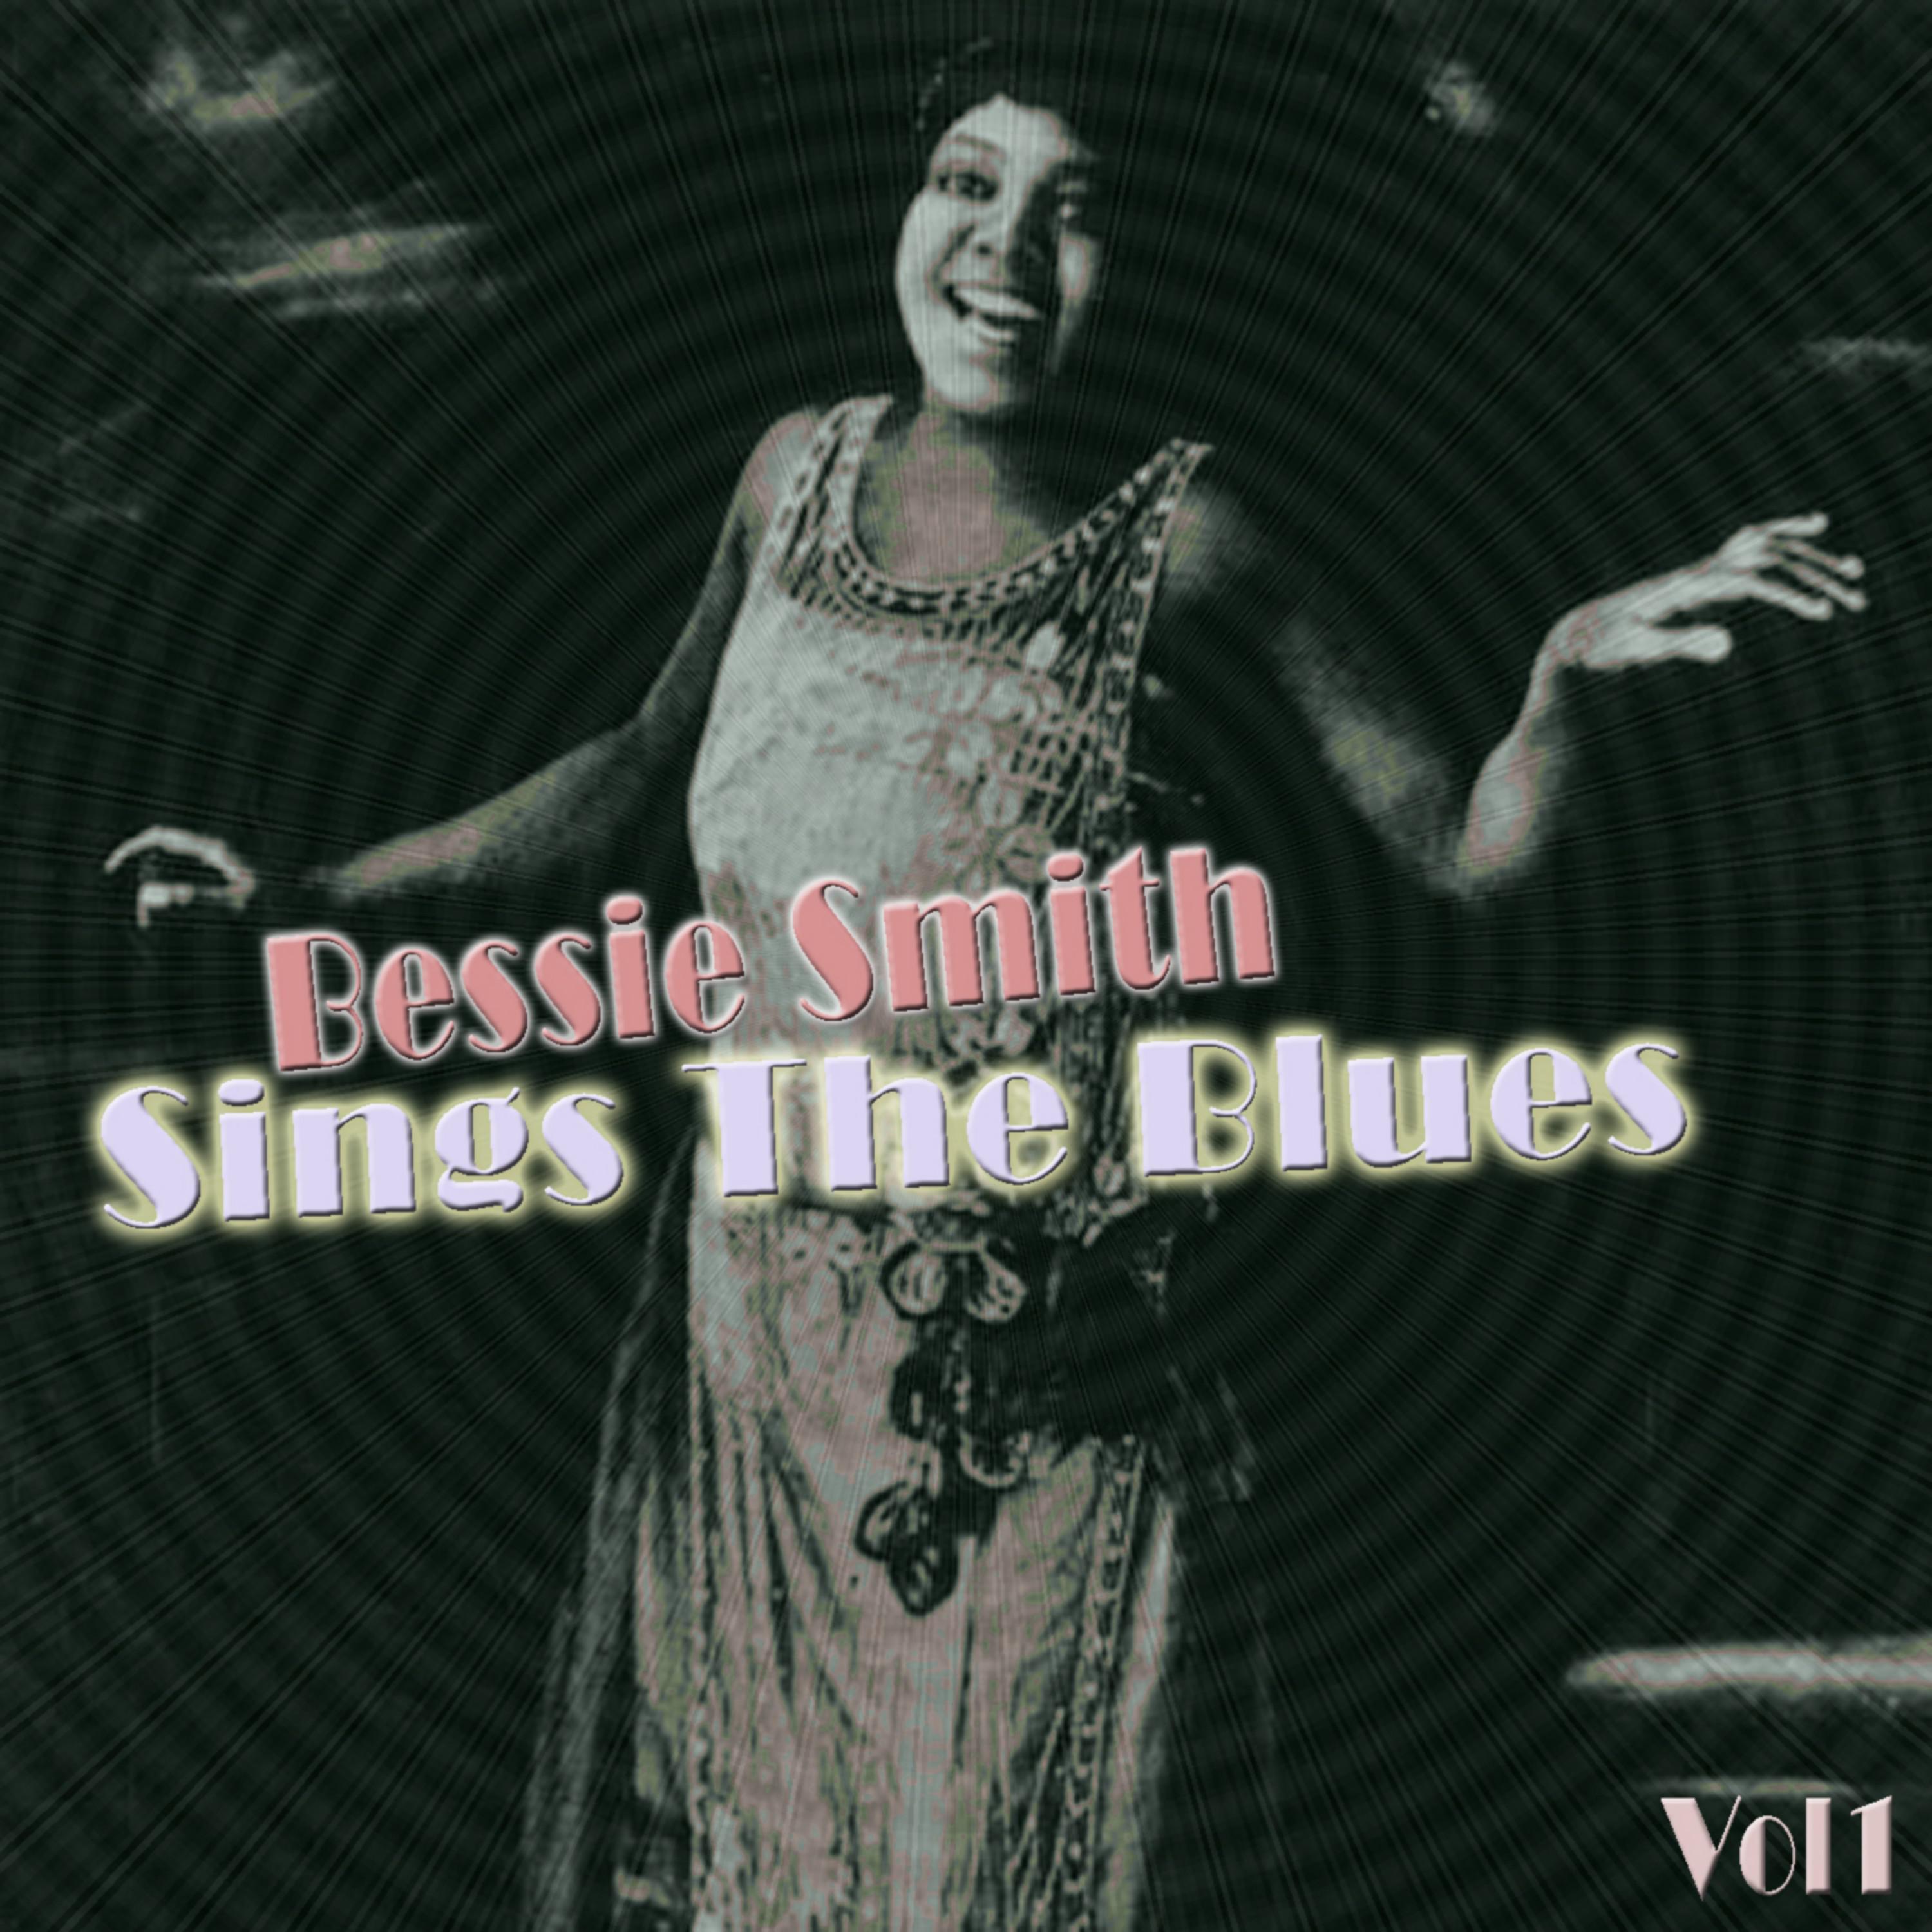 Bessie Smith Sings the Blues, Vol. 1